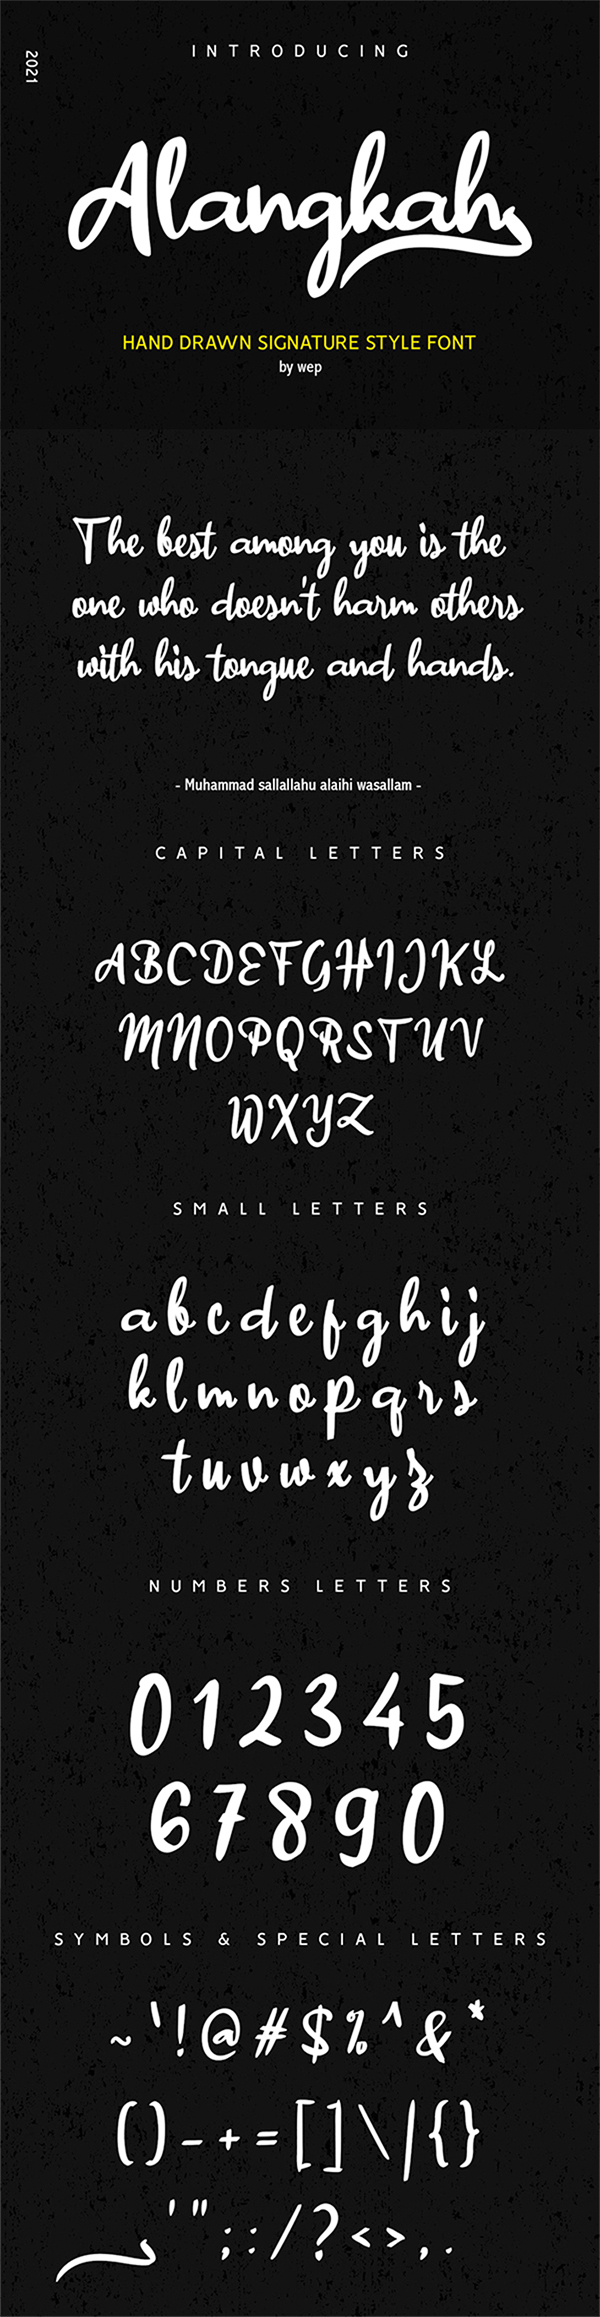 Free Awesome Hand Drawn Signature Font For Designers